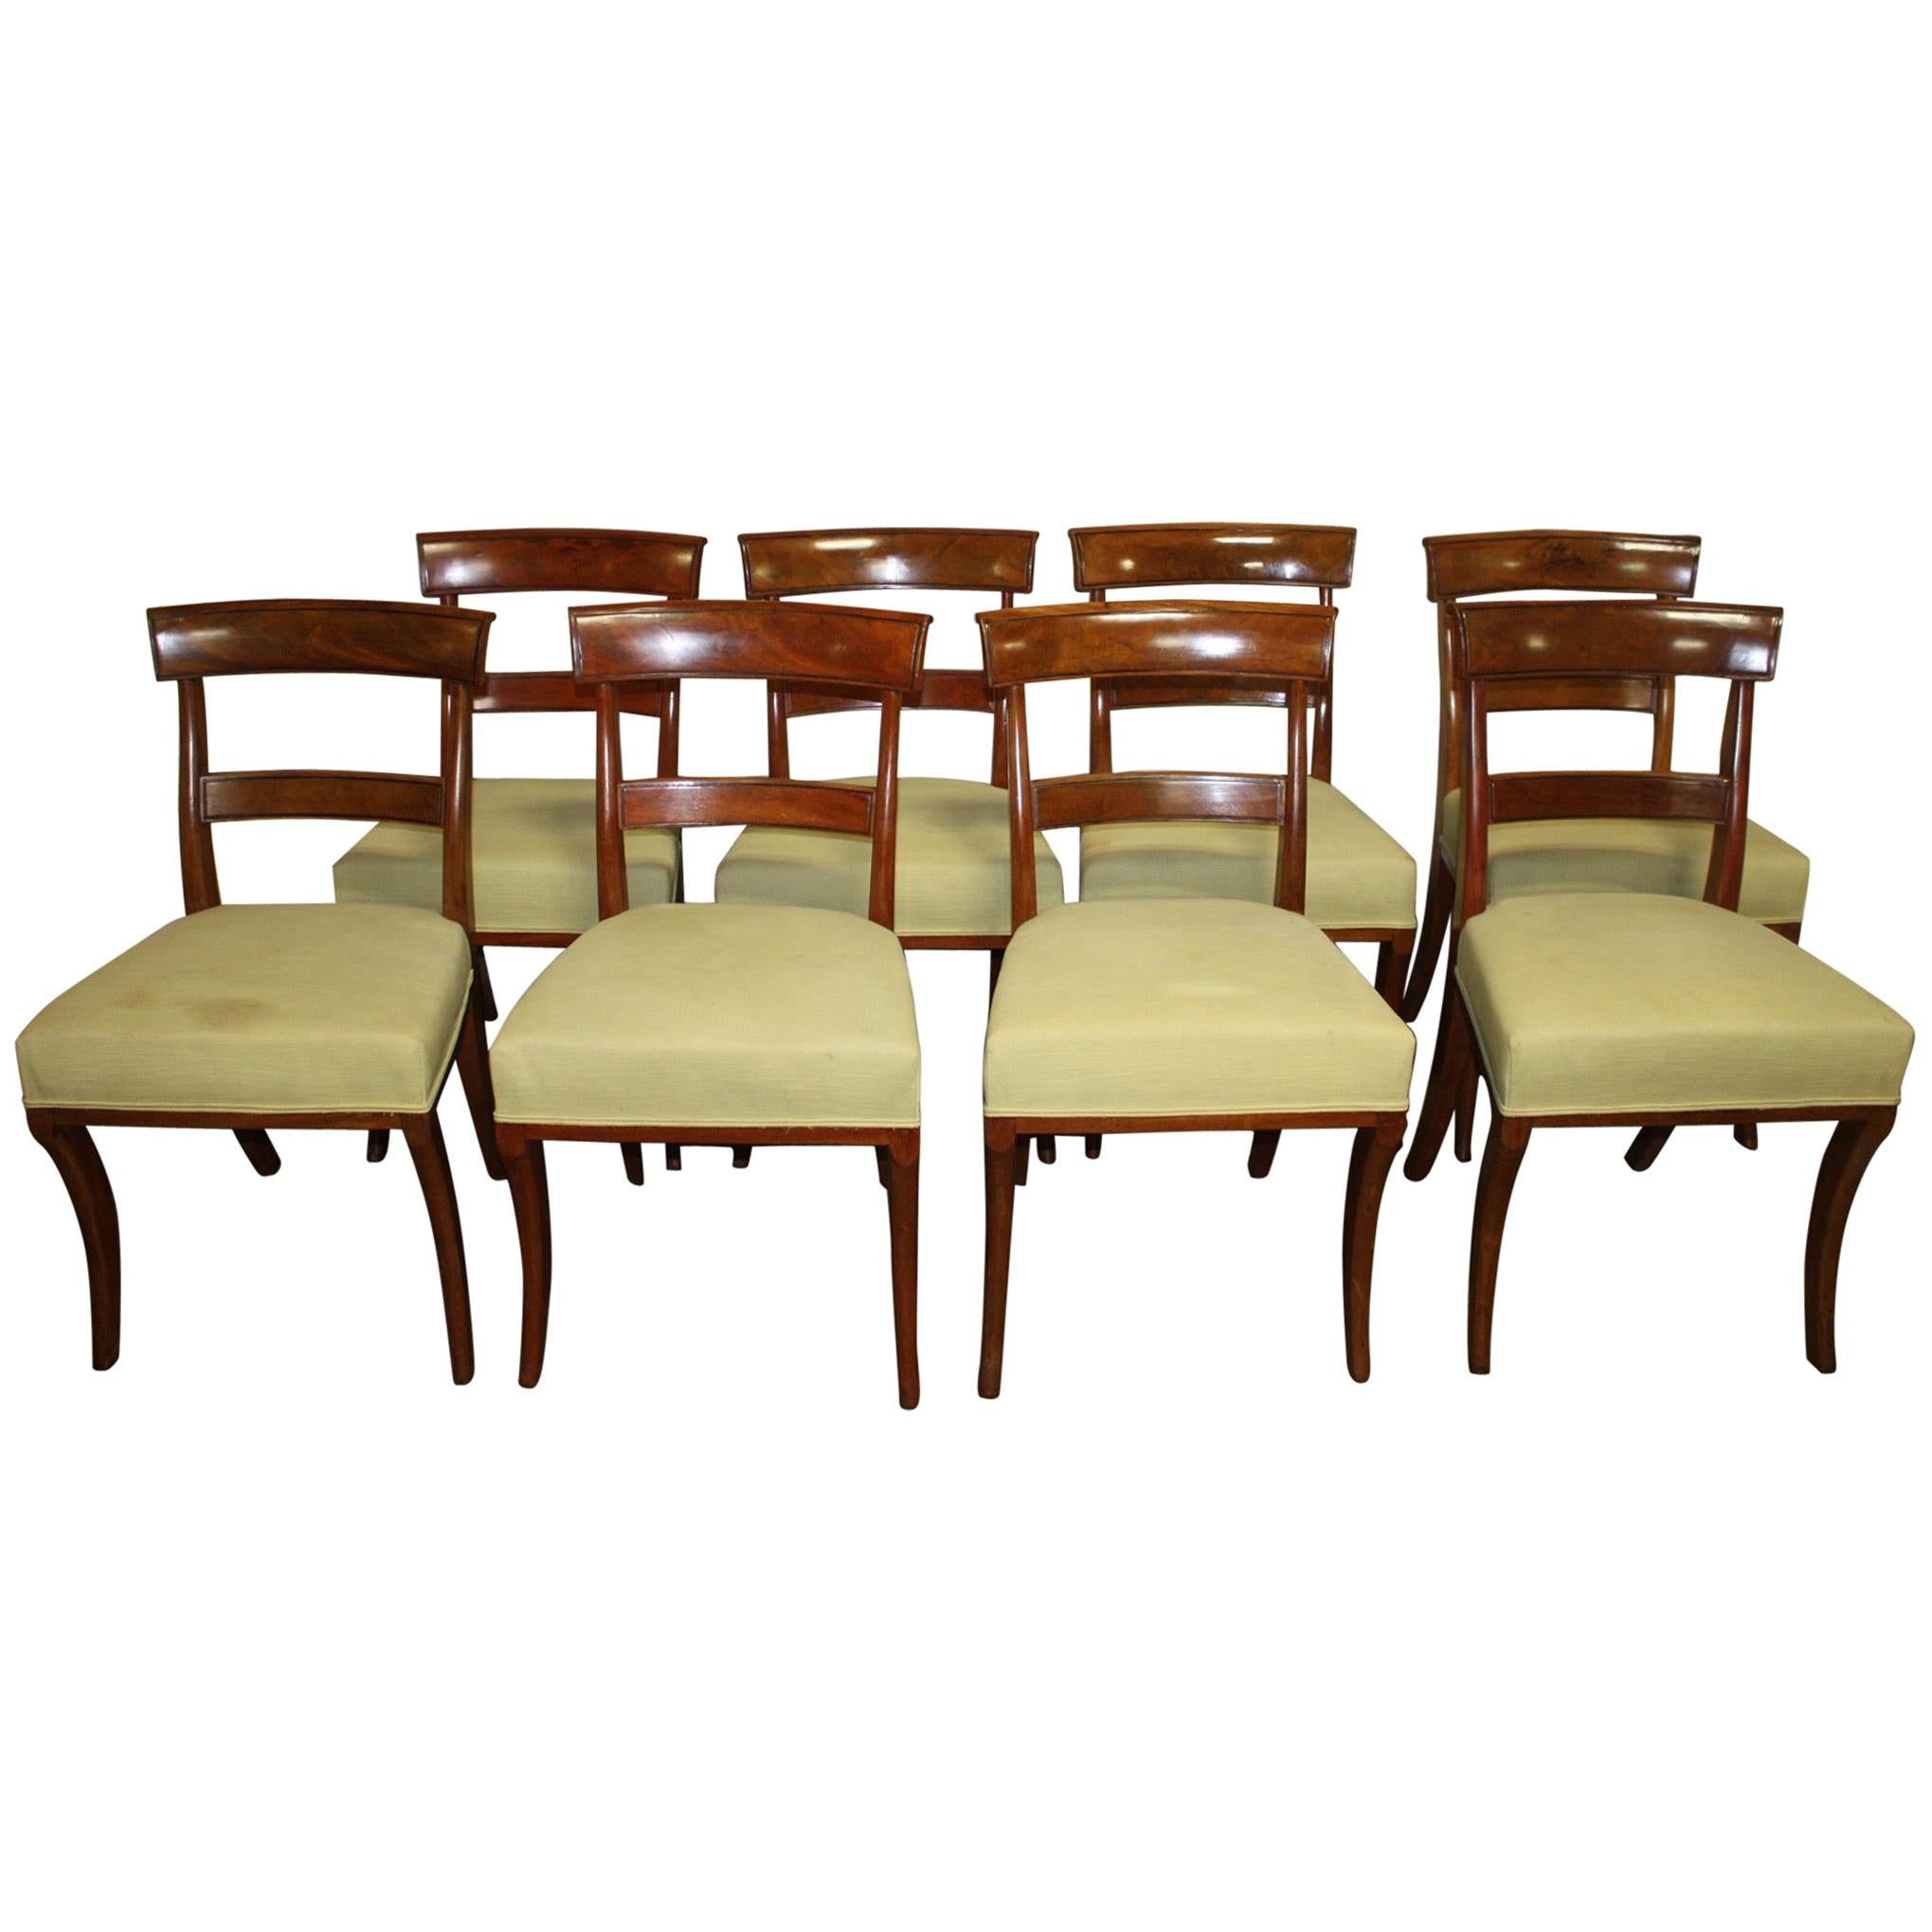 Superb Set of 8 French Dining Chairs, Louis-Philippe Period